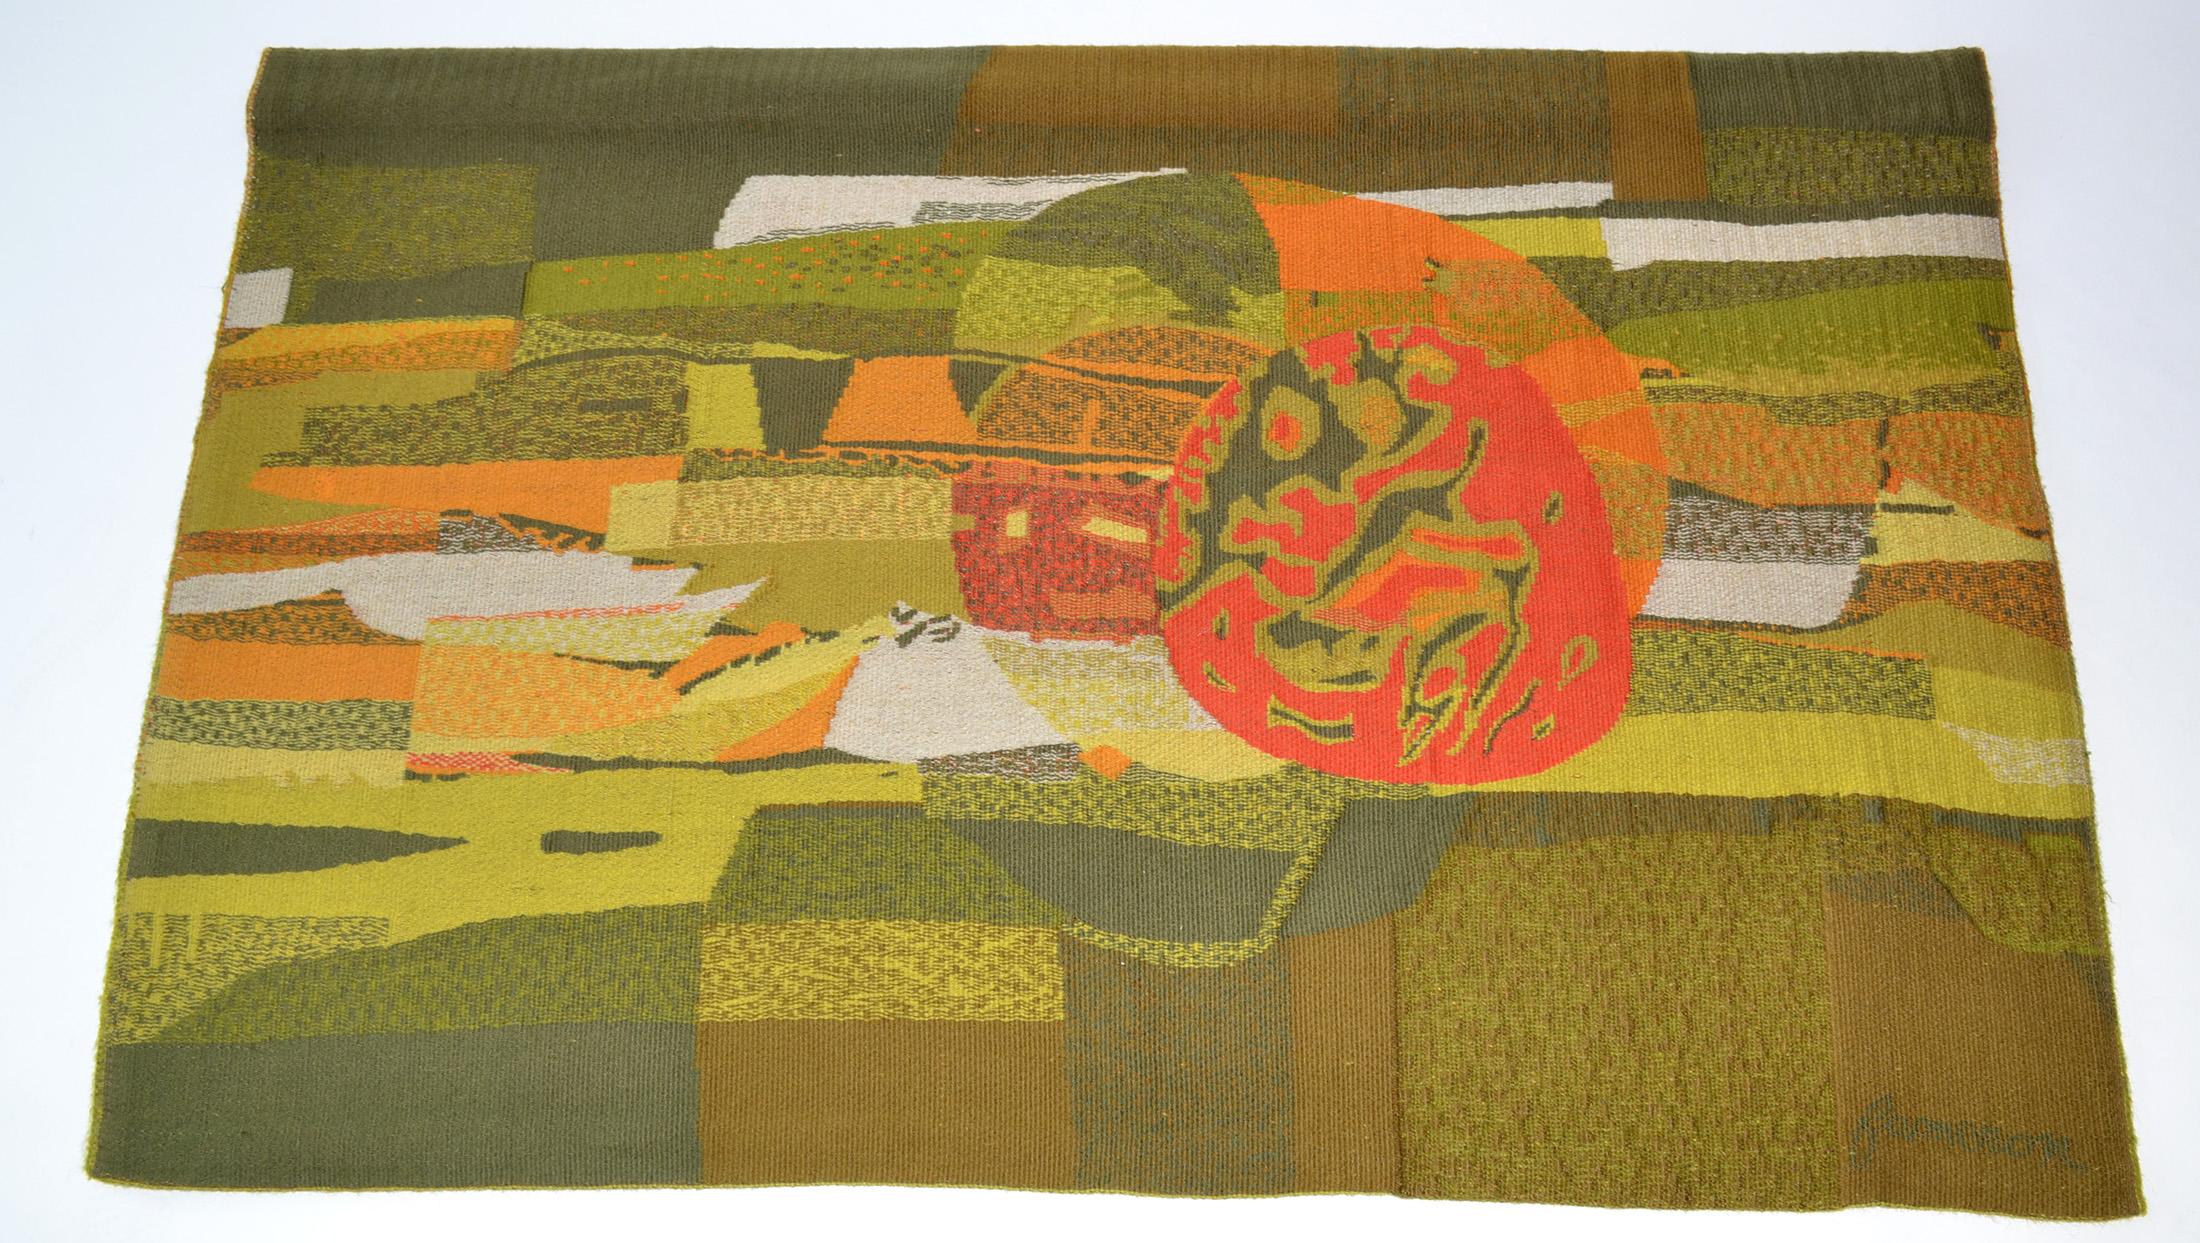 René Fumeron Cosmos Wool Wall Tapestry for Atelier Robert Four, France 1960

René FUMERON (1921-2004), Cosmos, Wool tapestry woven in the workshops of Aubusson Robert Four, numbered 101/200. Signed in the weft and on the bolduc. Woven in